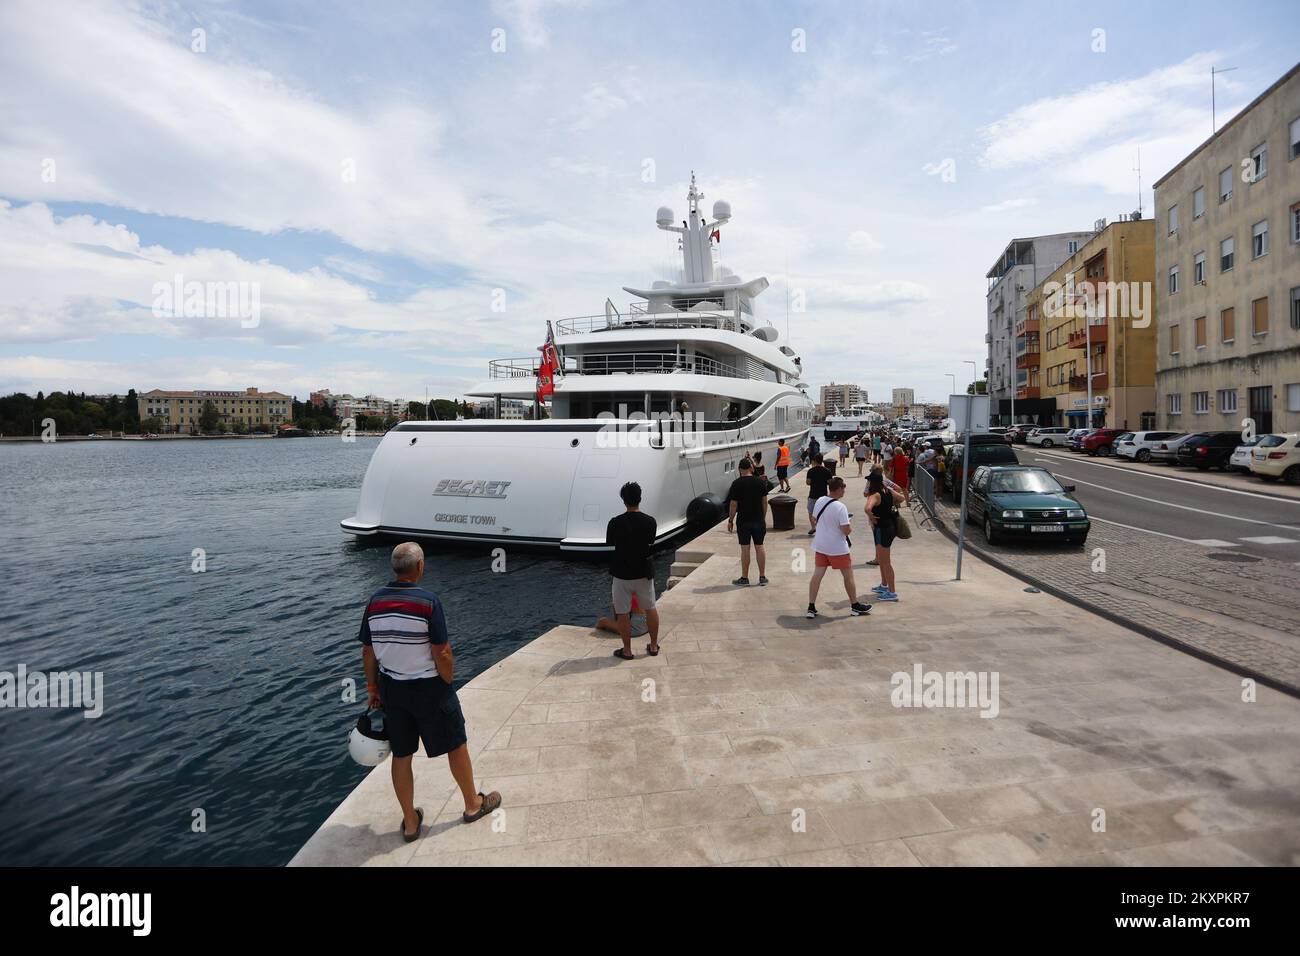 The 82.5-meter-long yacht 'Secret', owned by Nancy Walton Laurie, sailed  into the port in Zadar on July 18, 2021. Photo: Marko Dimic/PIXSELL Stock  Photo - Alamy